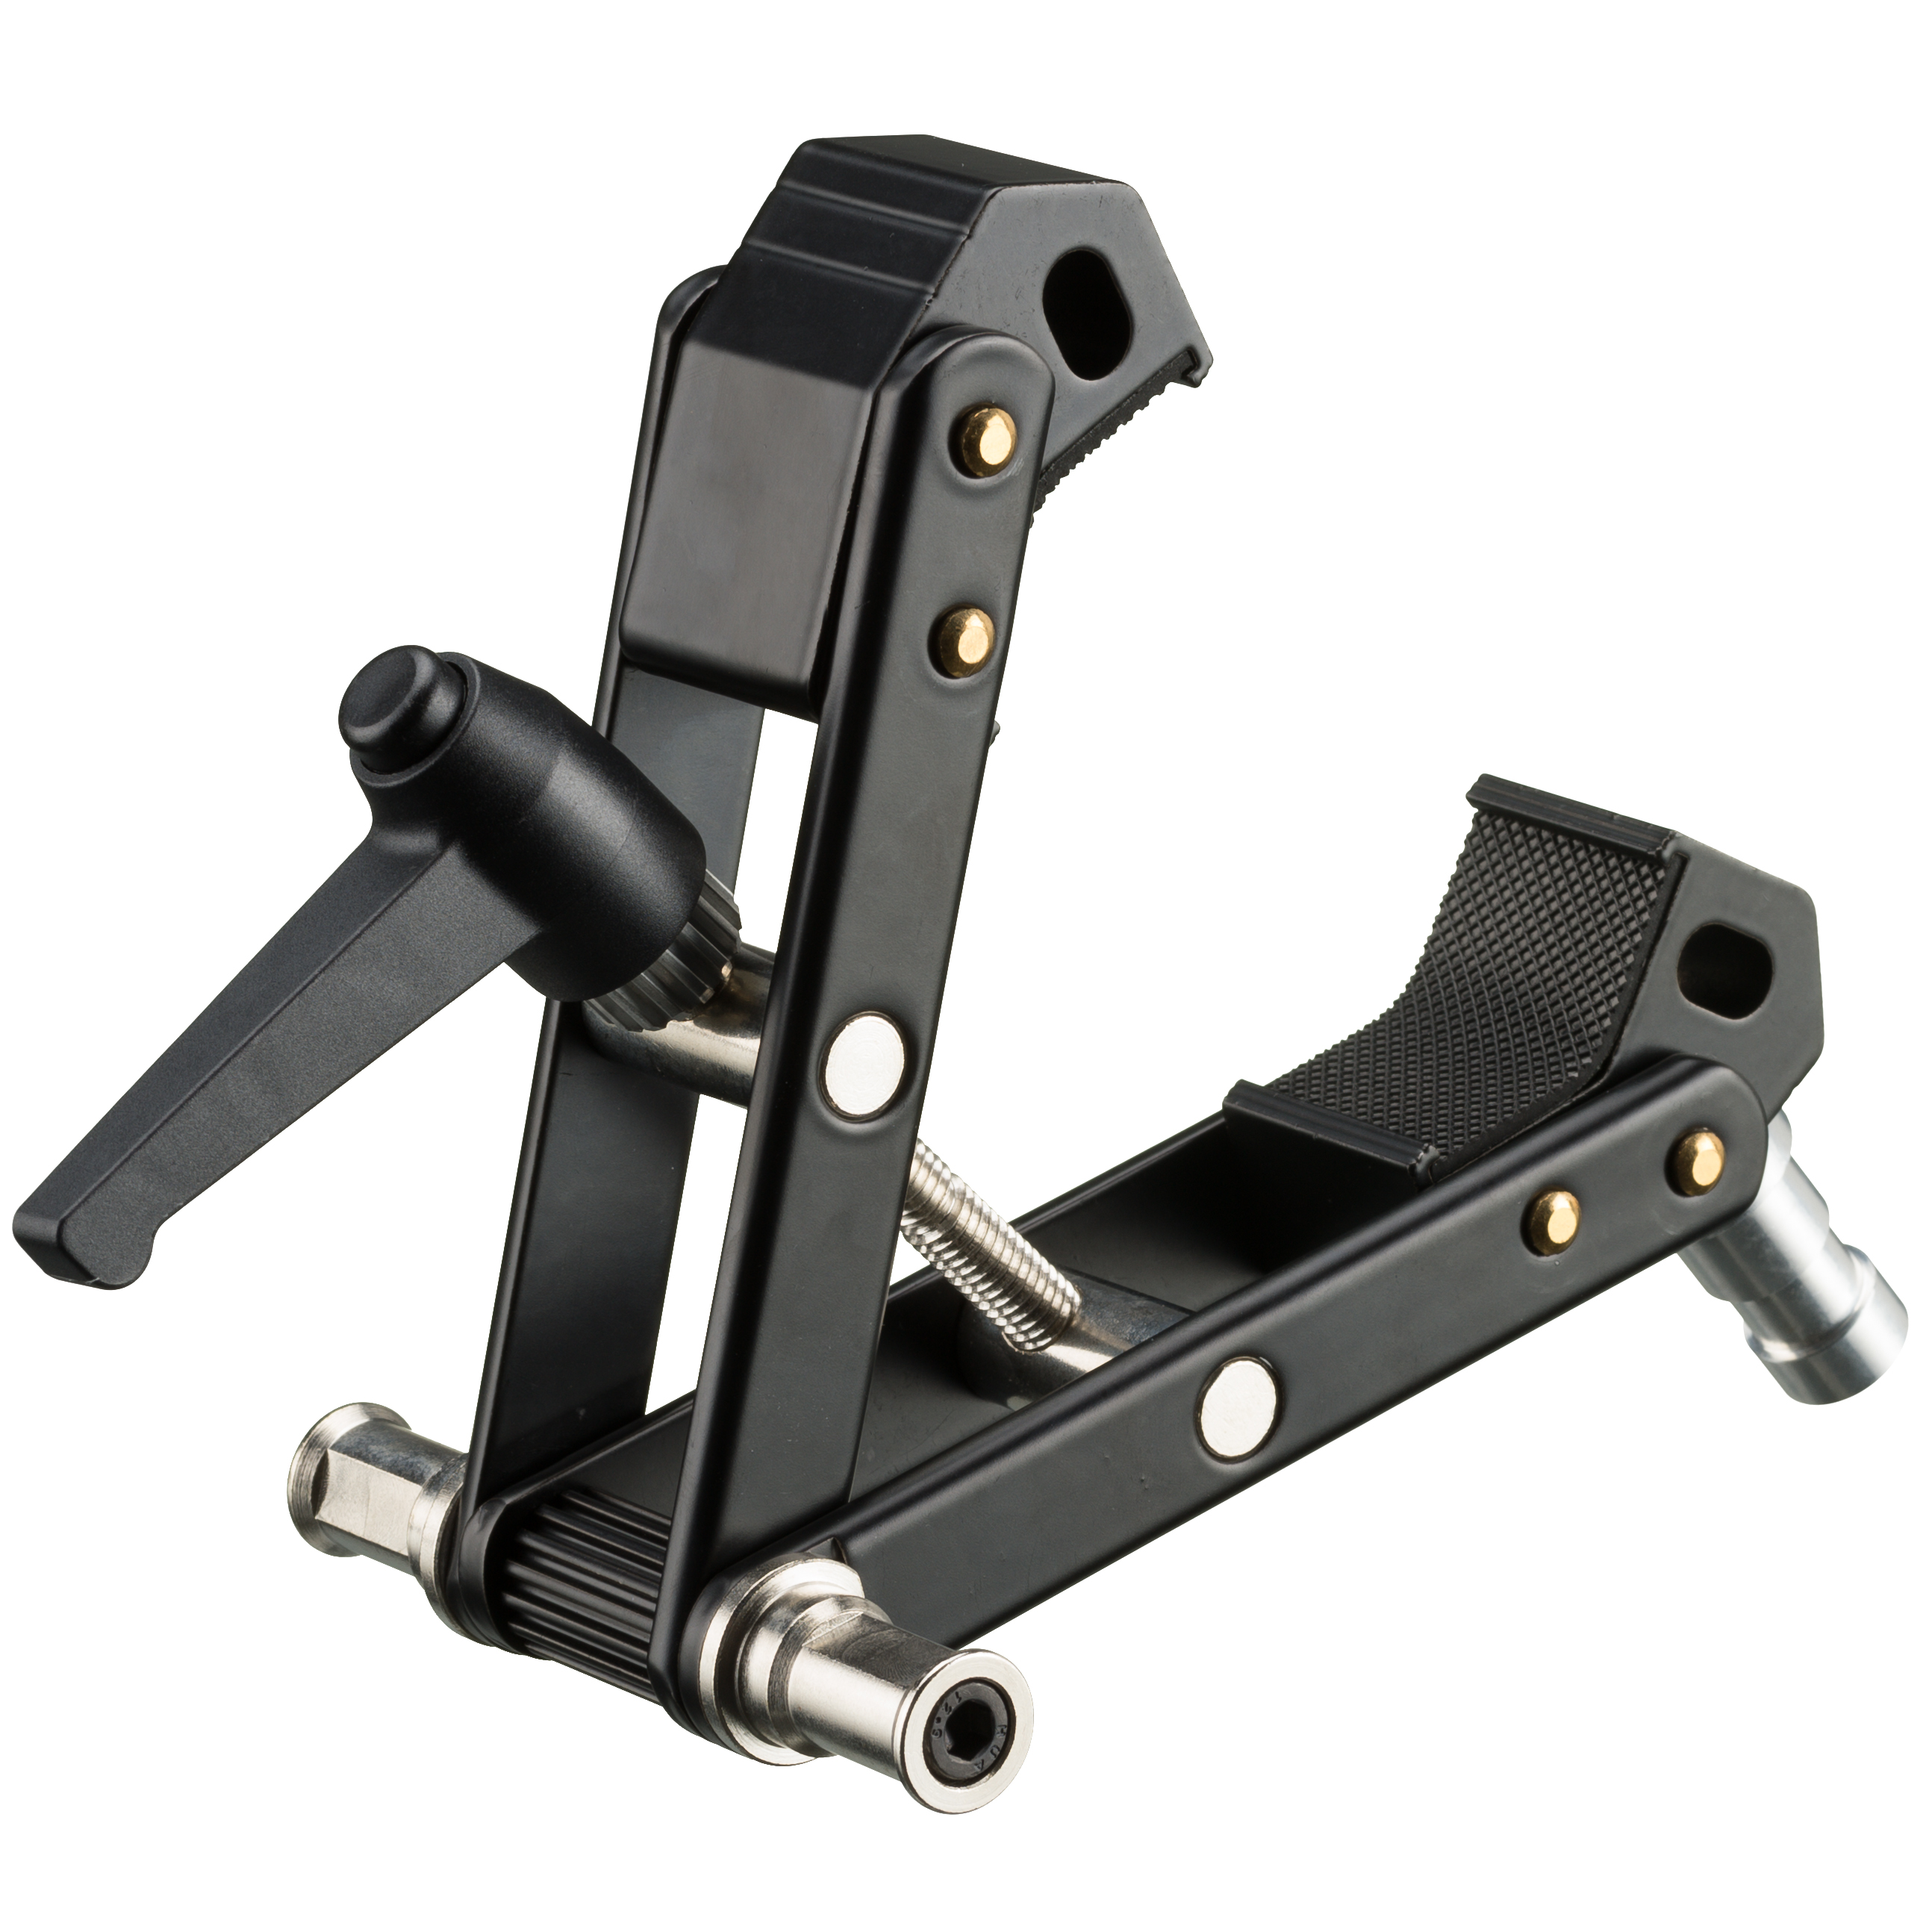 BRESSER BR-SC021 Multi Clamp with 12 kg Load Capacity